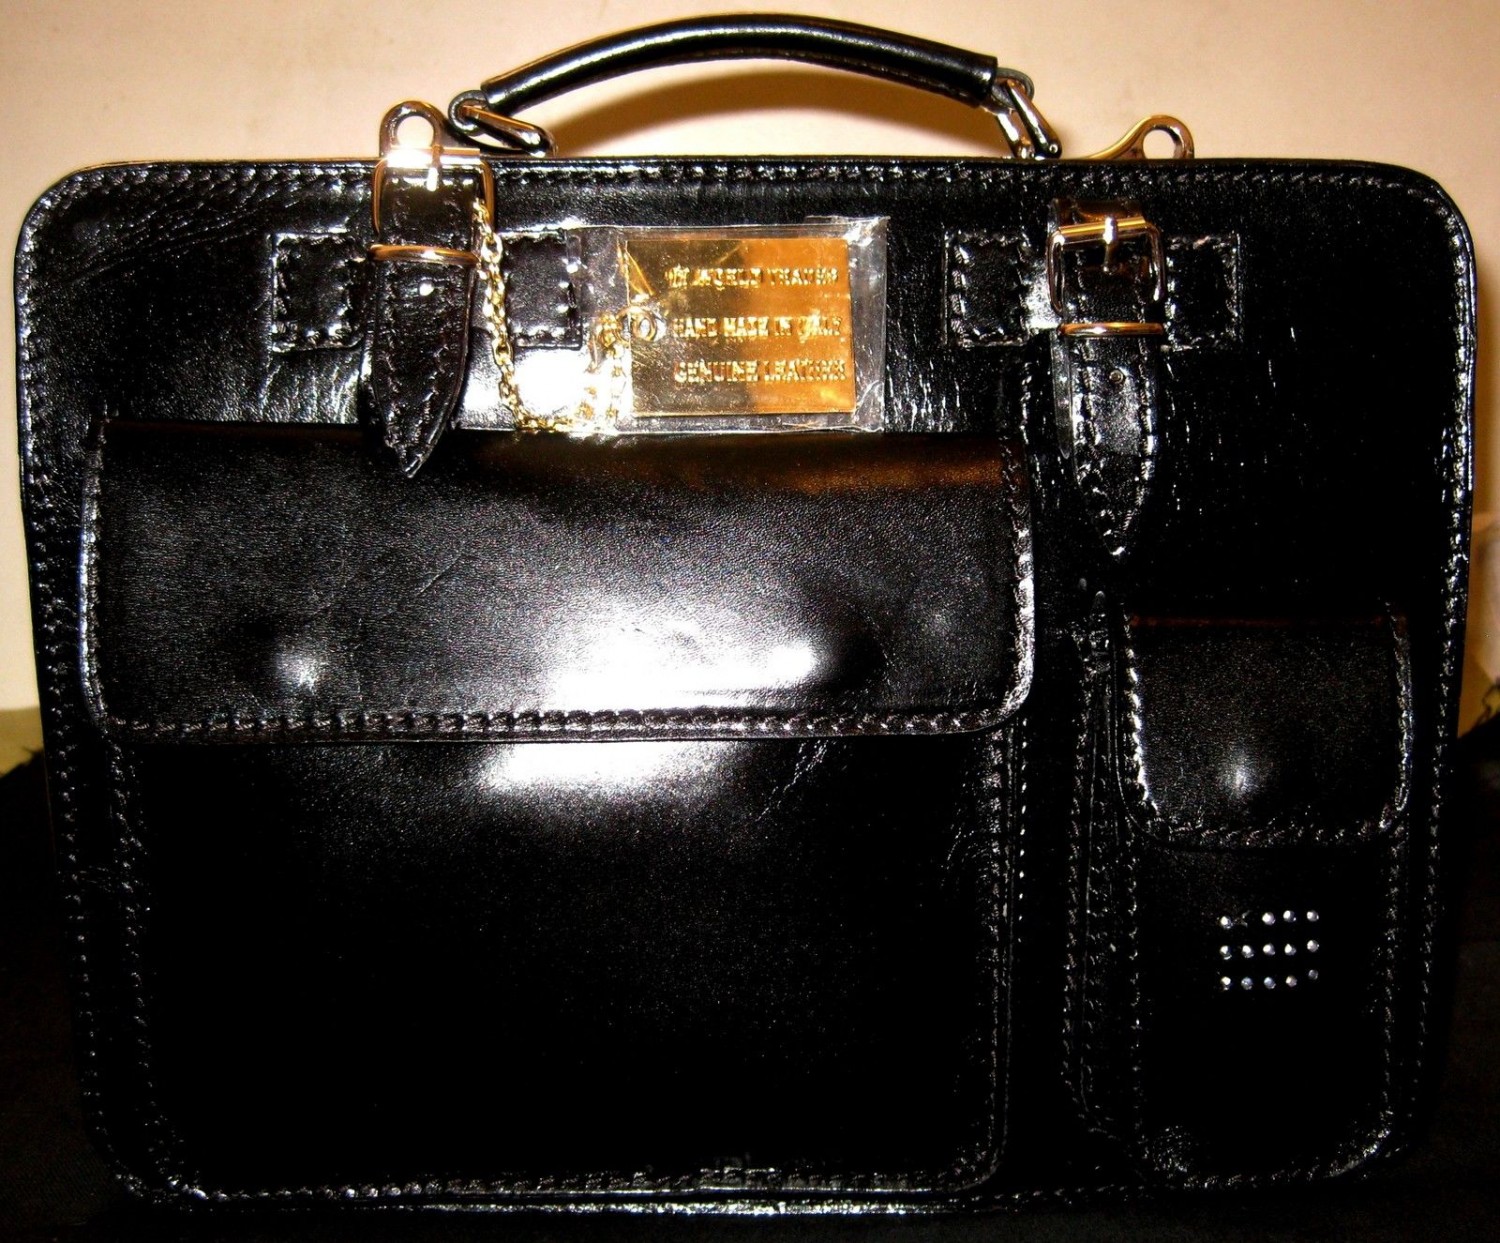 100% Leather Classic Briefcase, Handmade In Tuscany - Italy - Black Color.